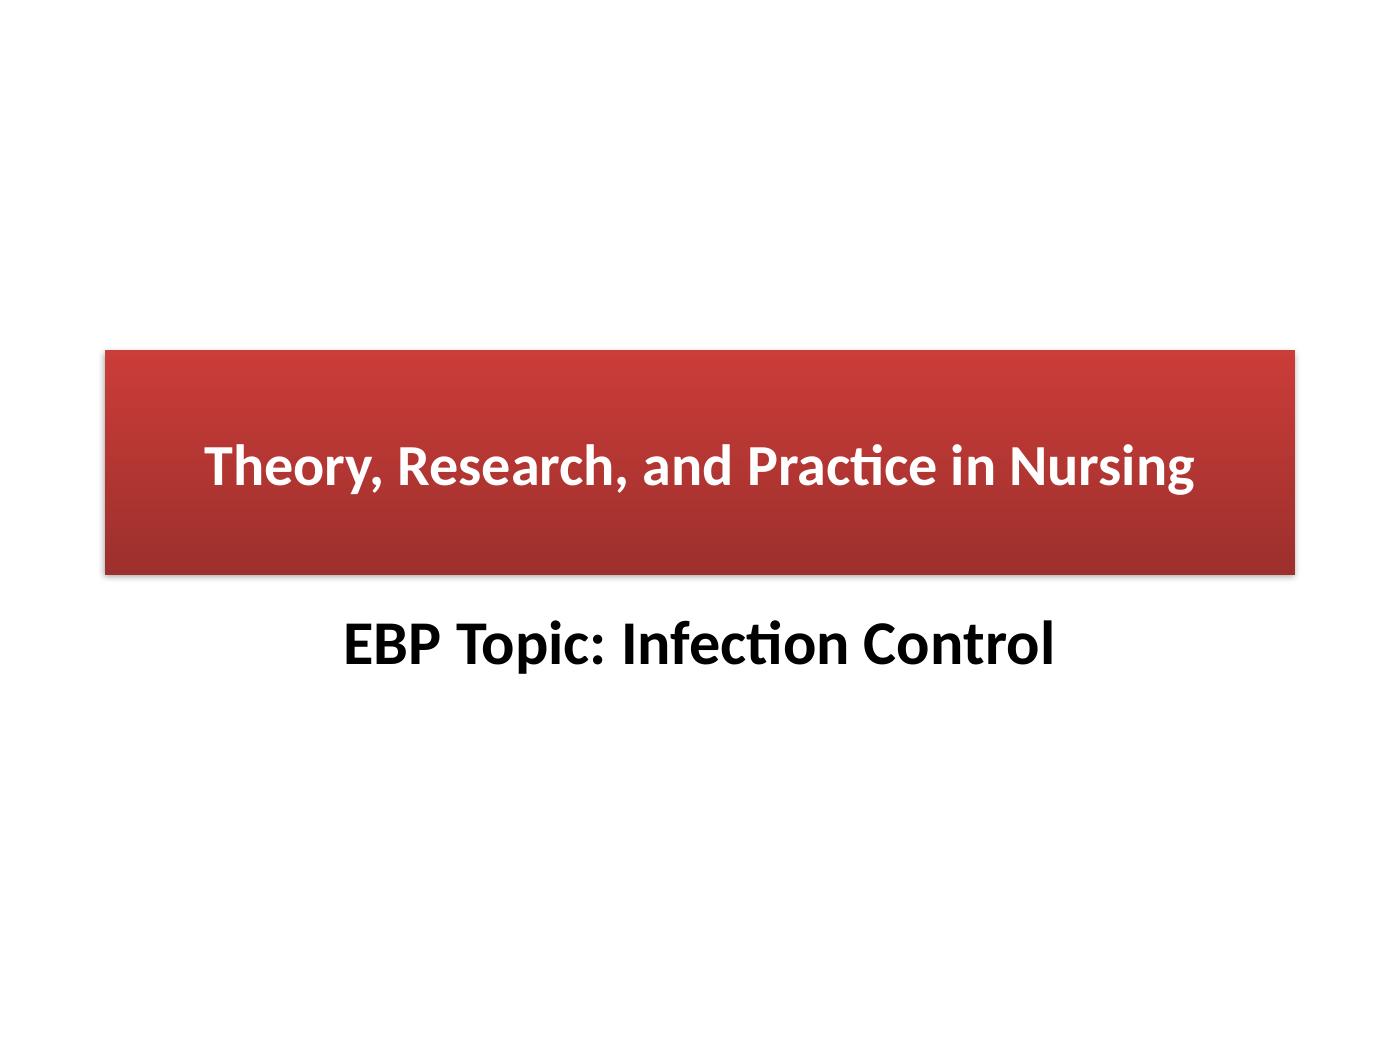 Theory, Research, and Practice in Nursing_1